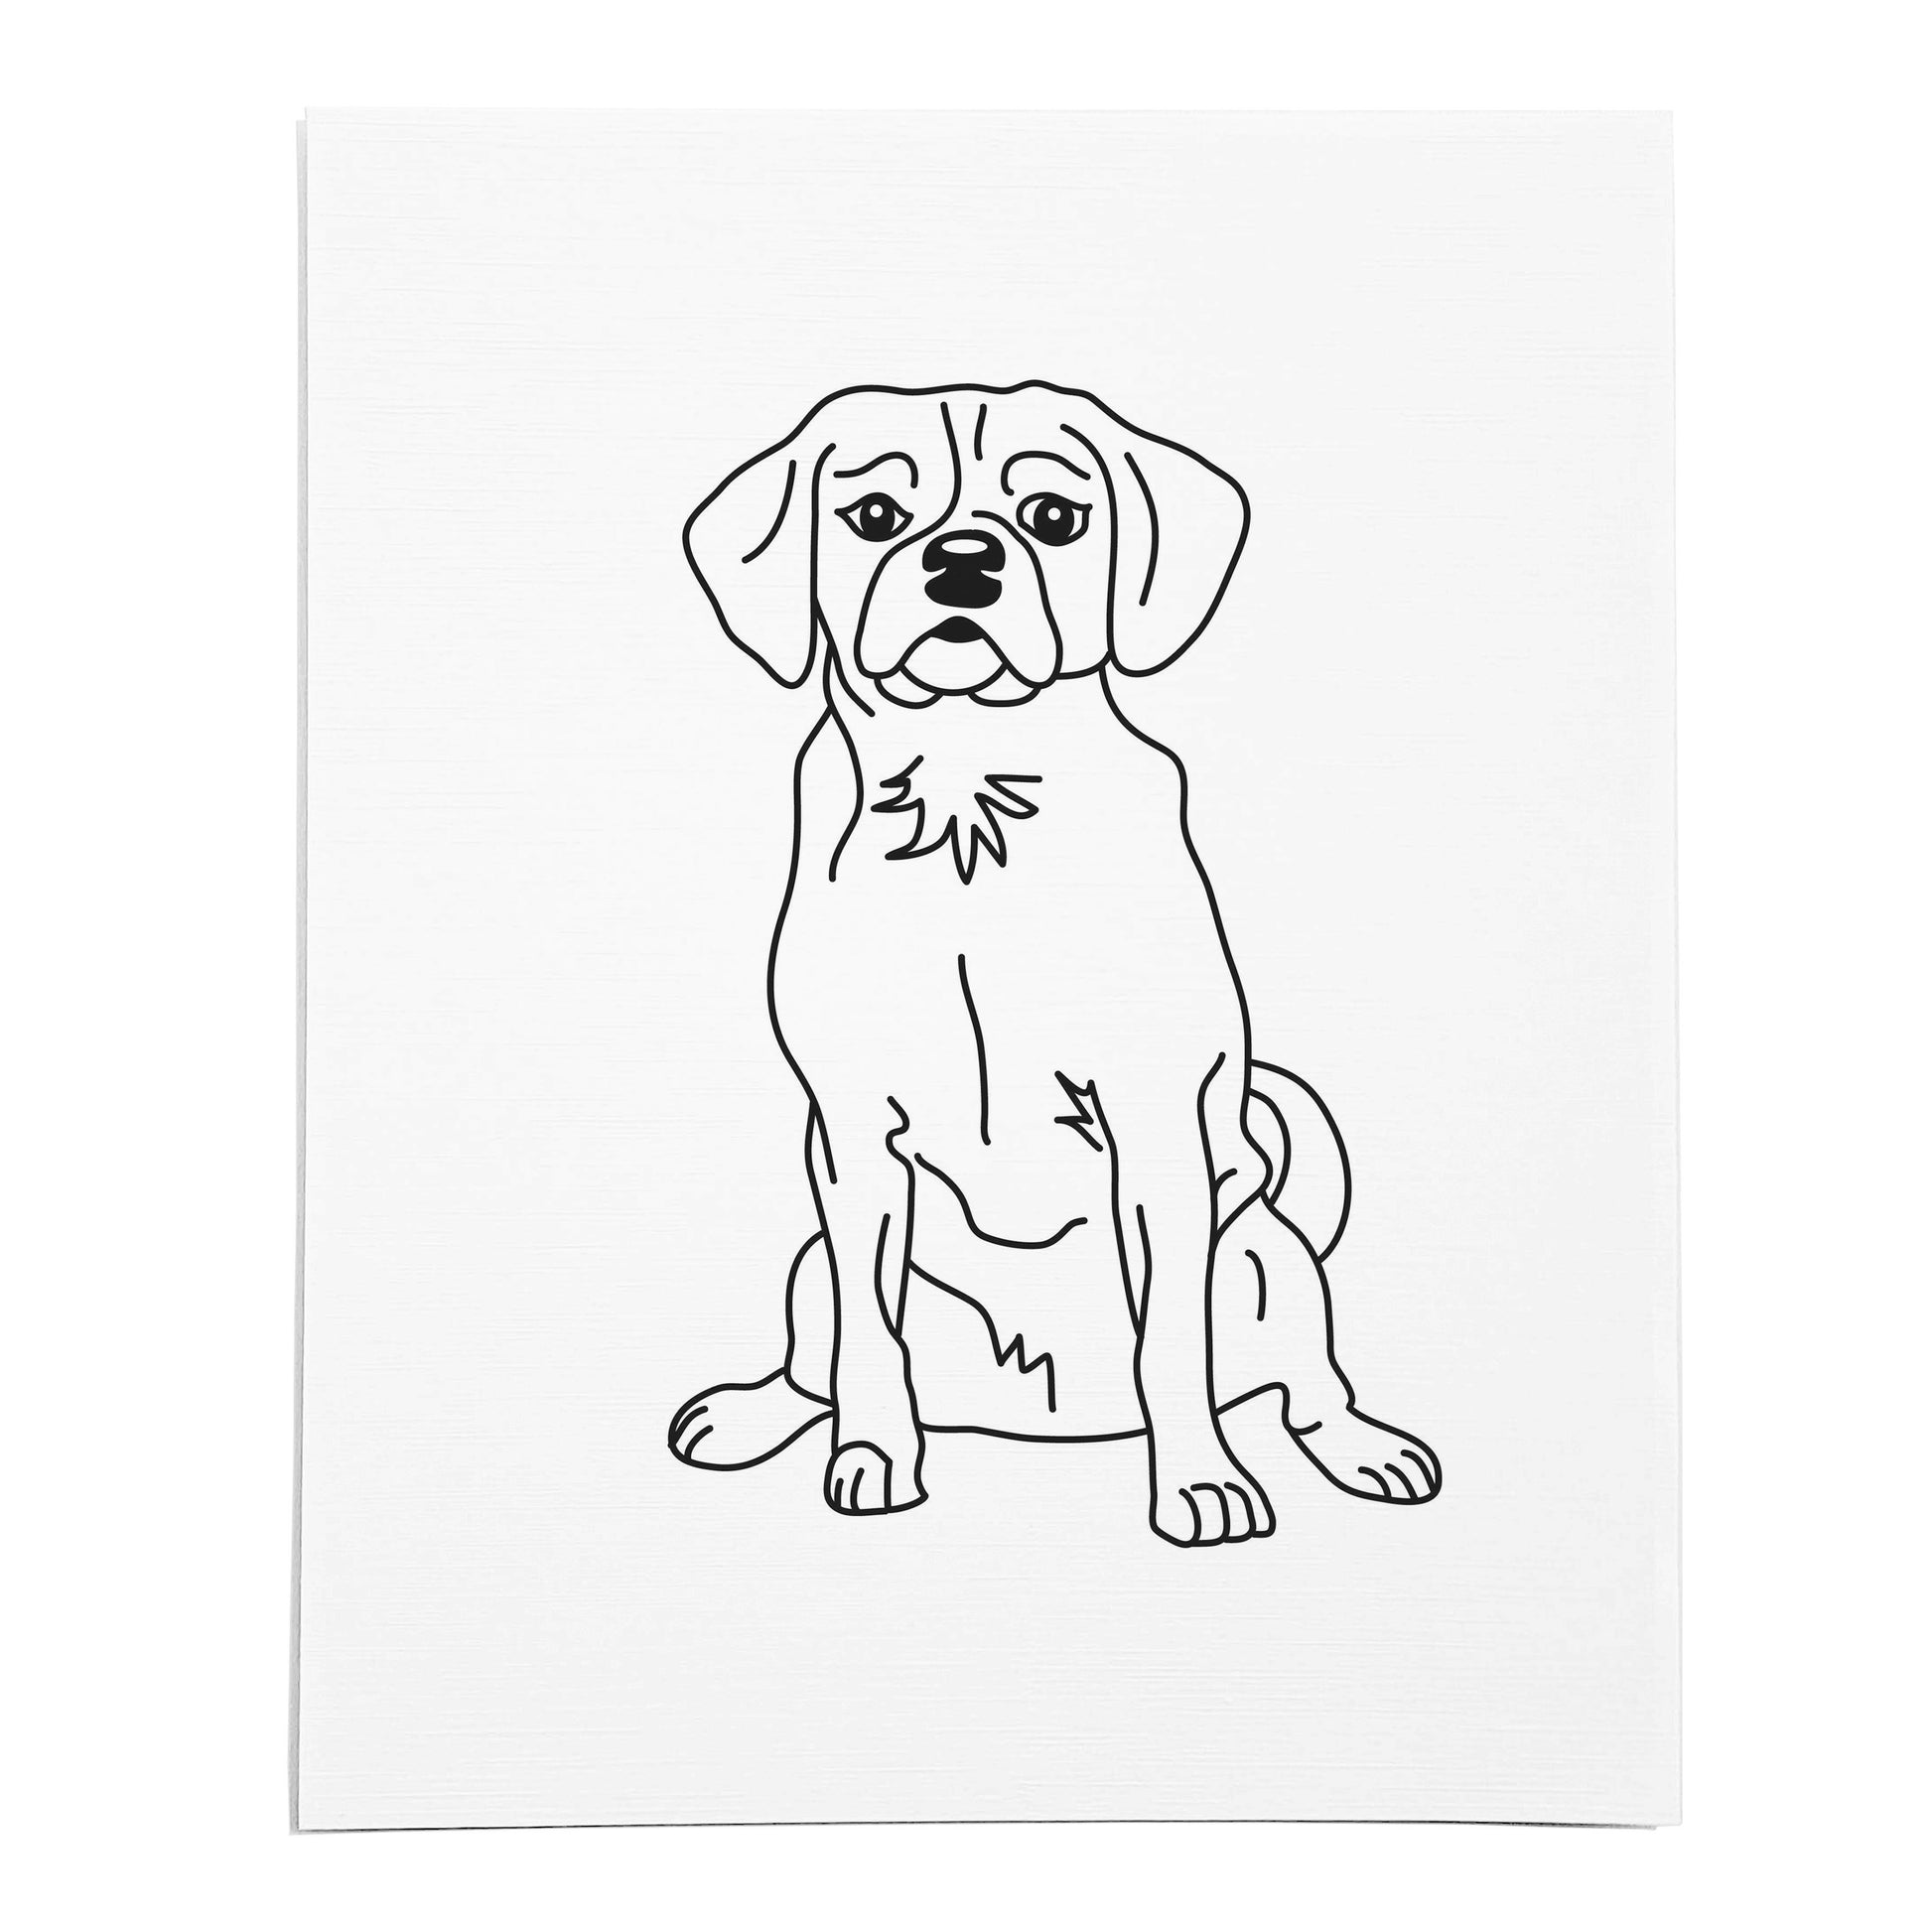 An art print featuring a line drawing of a Puggle dog on white linen paper